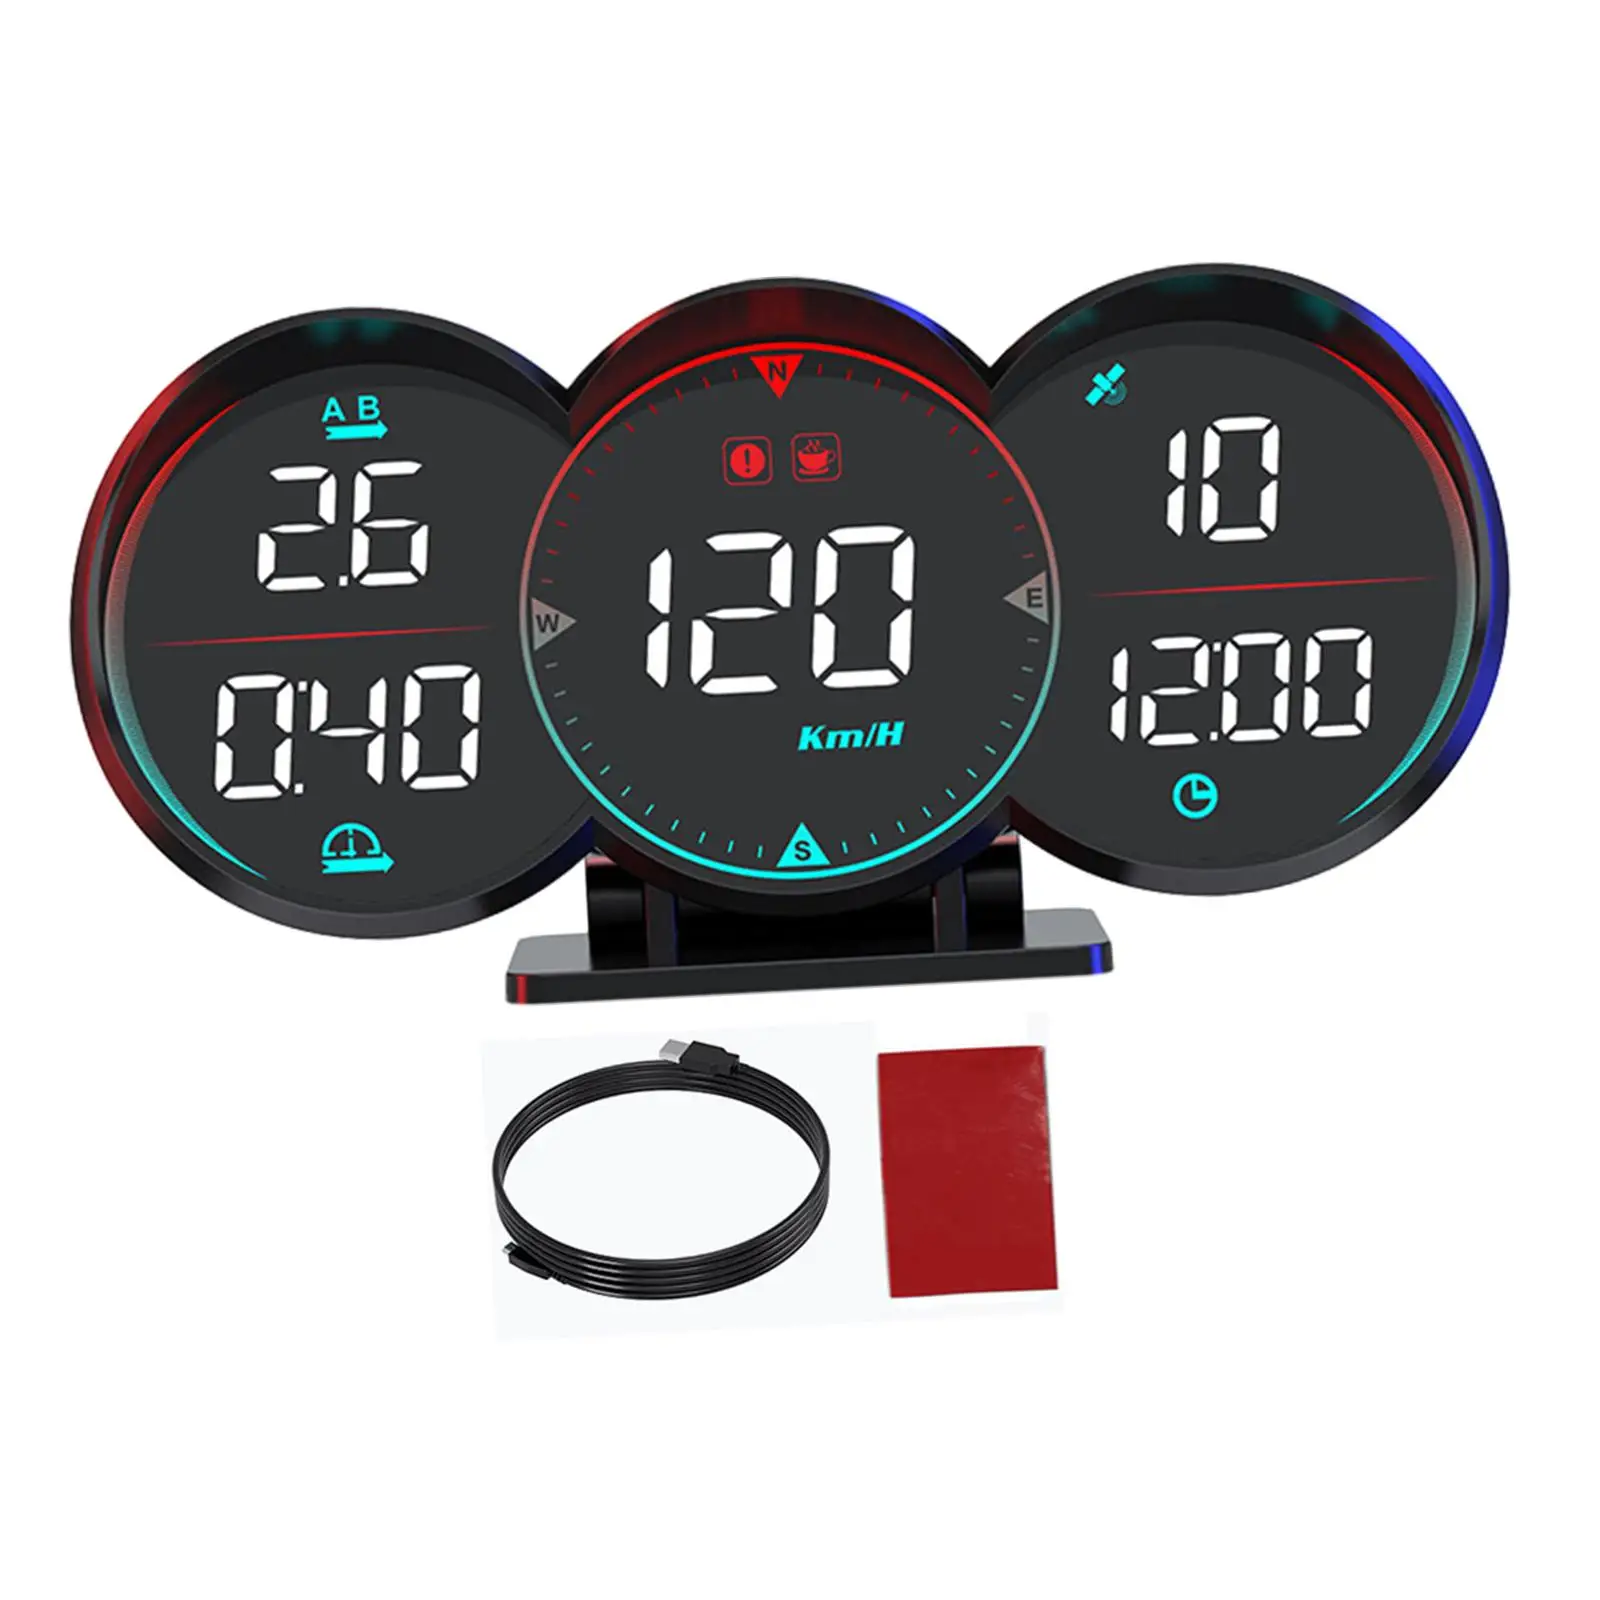 G17 GPS HUD Digital GPS Speedometer for Car for Supplies Vehicle Travel